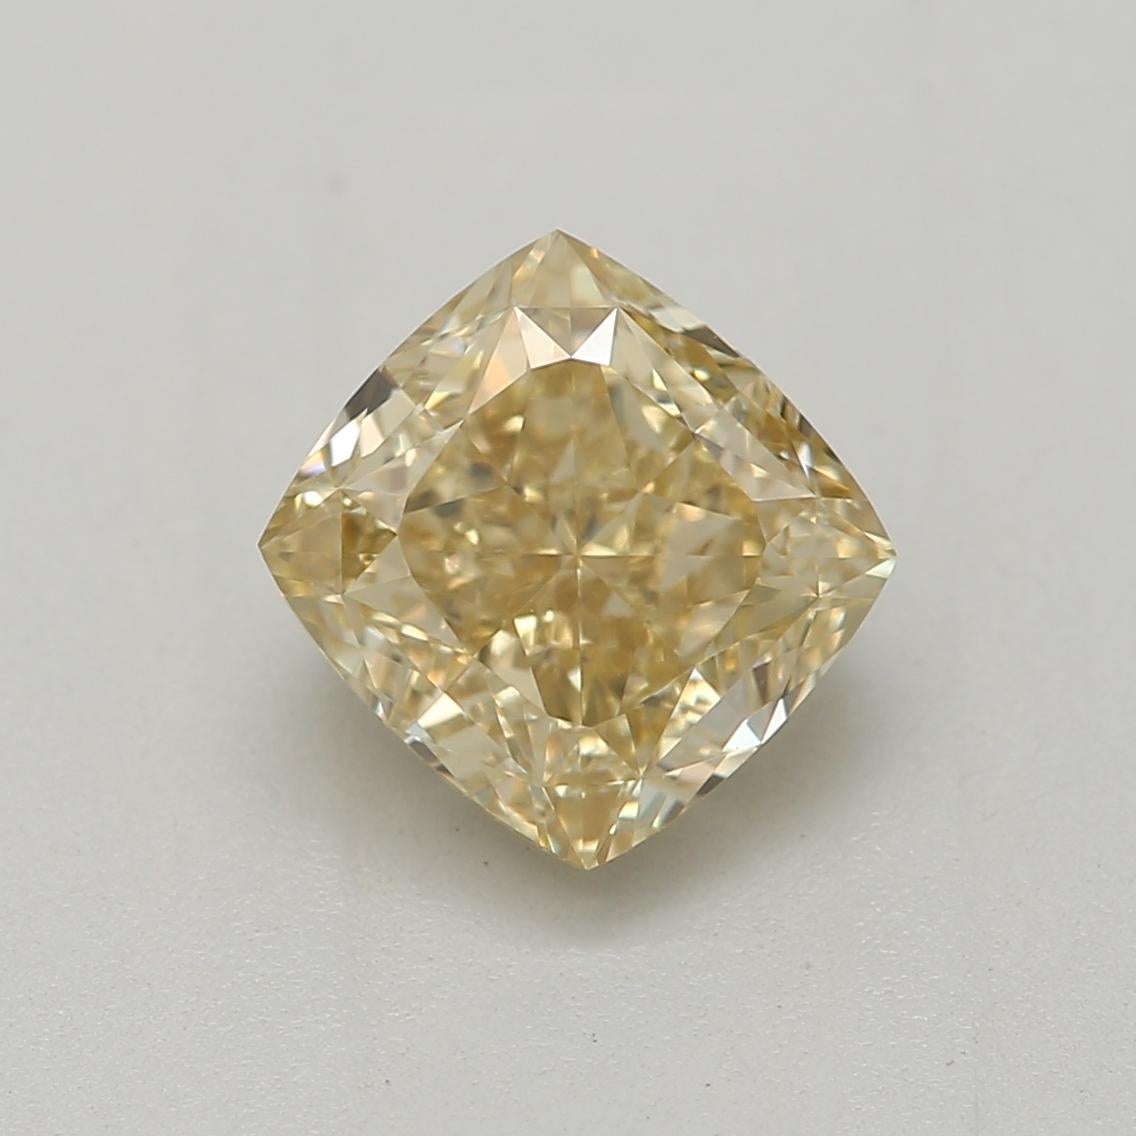 *100% NATURAL FANCY COLOUR DIAMOND*

✪ Diamond Details ✪

➛ Shape: Cushion
➛ Colour Grade: Fancy Brownish Yellow
➛ Carat: 1.02
➛ Clarity: Vs1
➛ GIA  Certified 

^FEATURES OF THE DIAMOND^

✪ Our Specialty ✪

➛ We can definitely work on your special